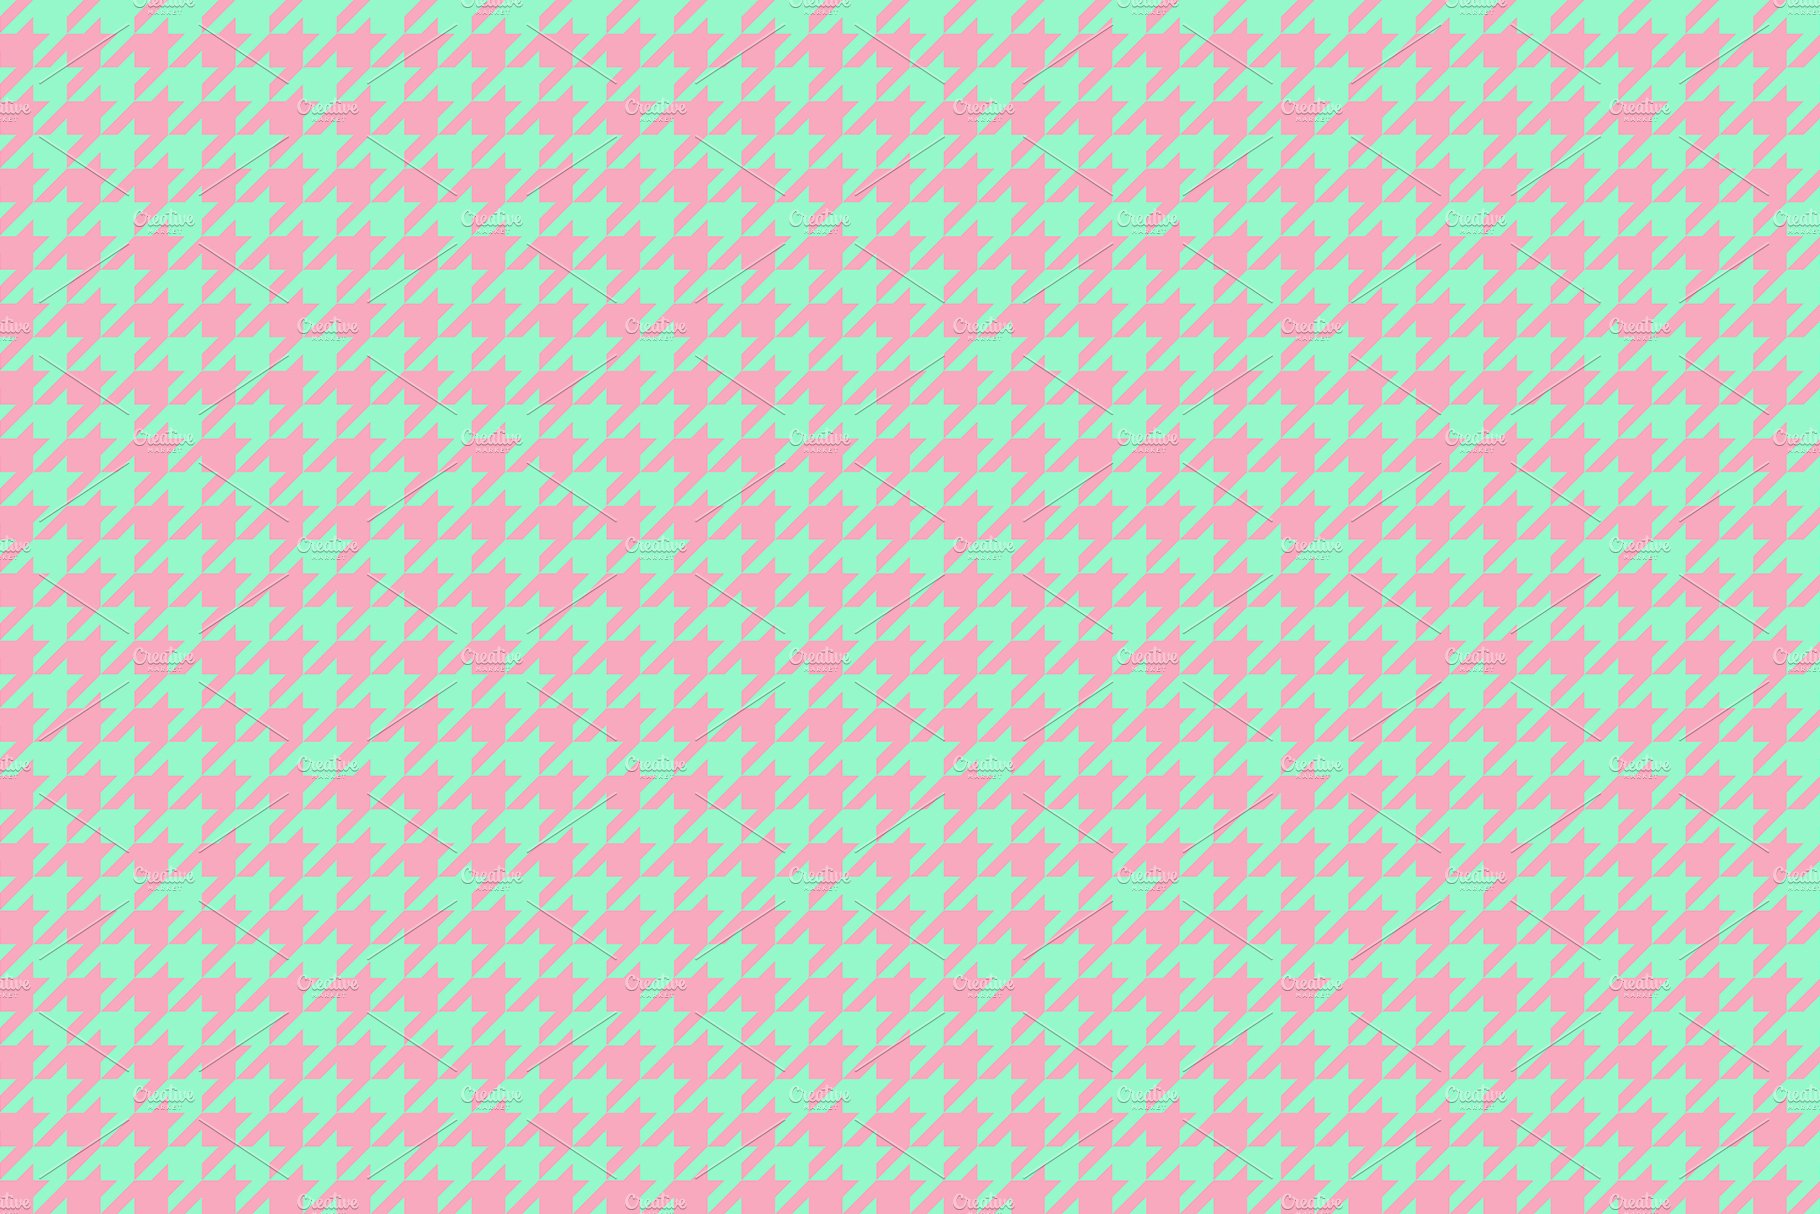 11 houndstooth pattern background texture copy 653